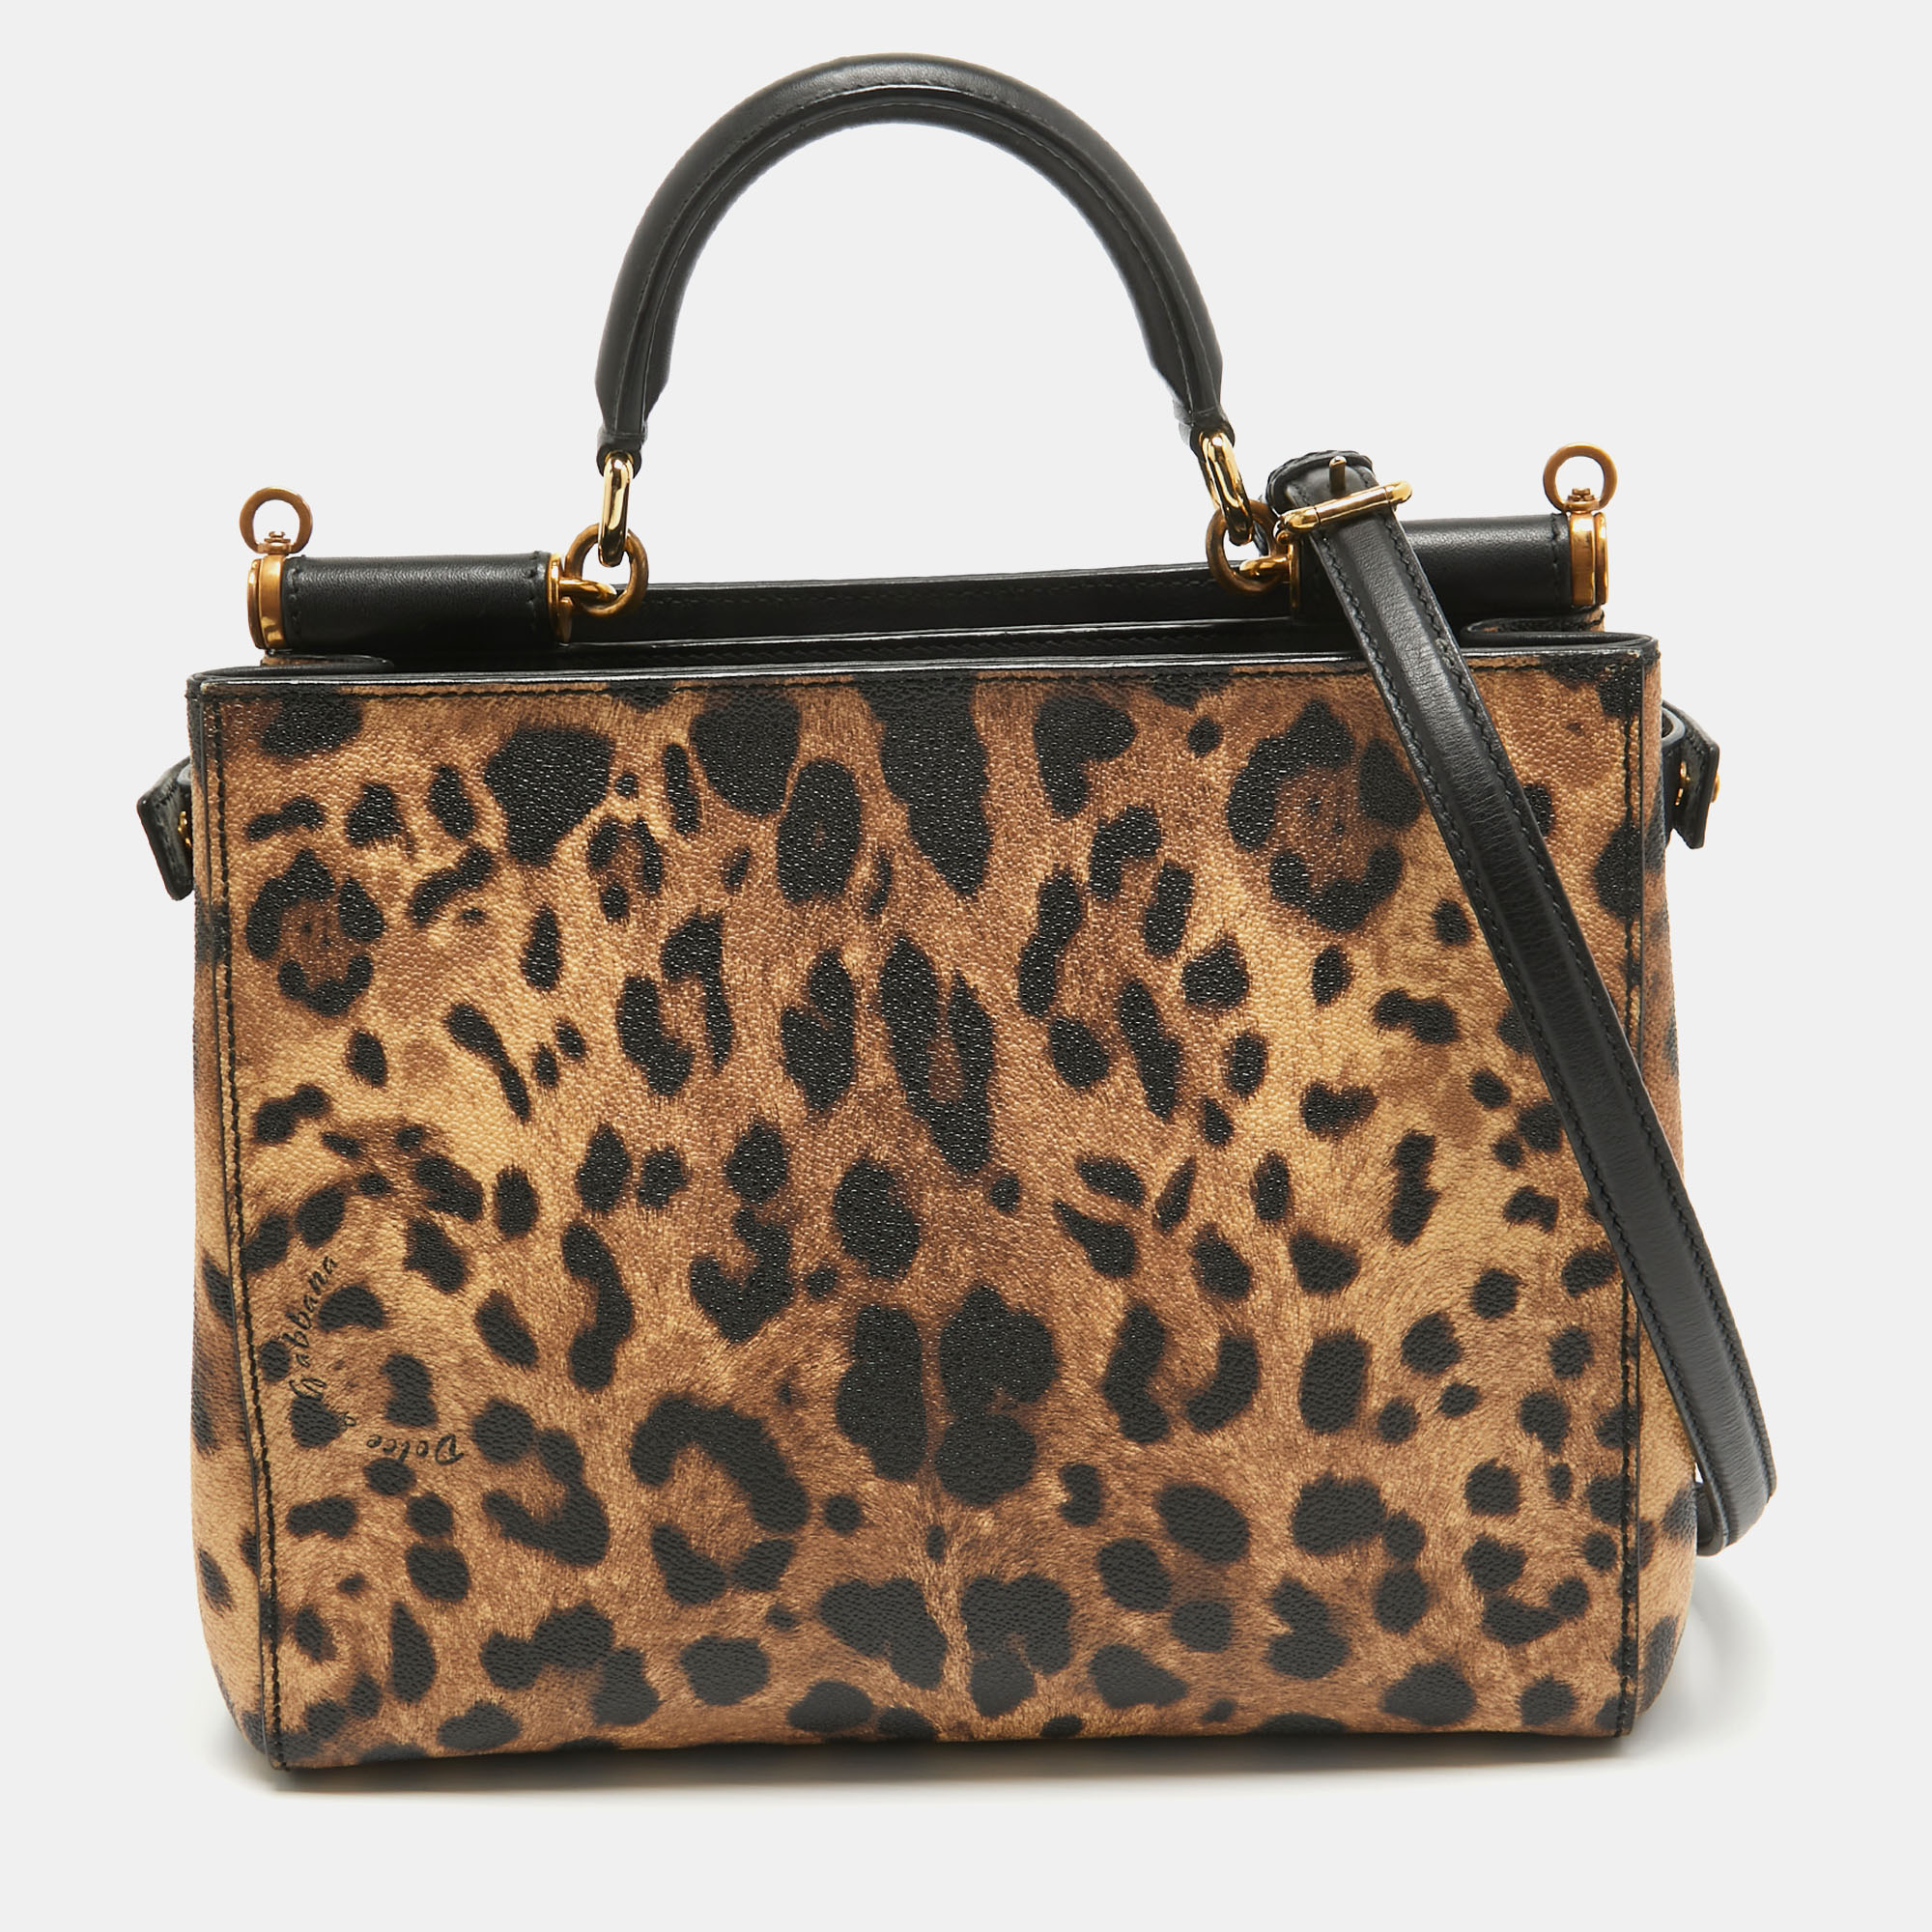 The Sicily 62 bags are one of the most celebrated creations from Dolce and Gabbana. It is a handbag that has not only seen countless adaptations but also gained the love of women for years. This tote here comes in a leopard printed canvas design and features top handles a removable shoulder strap and metal feet. The leather bag also offers spacious compartments for you to house your belongings.